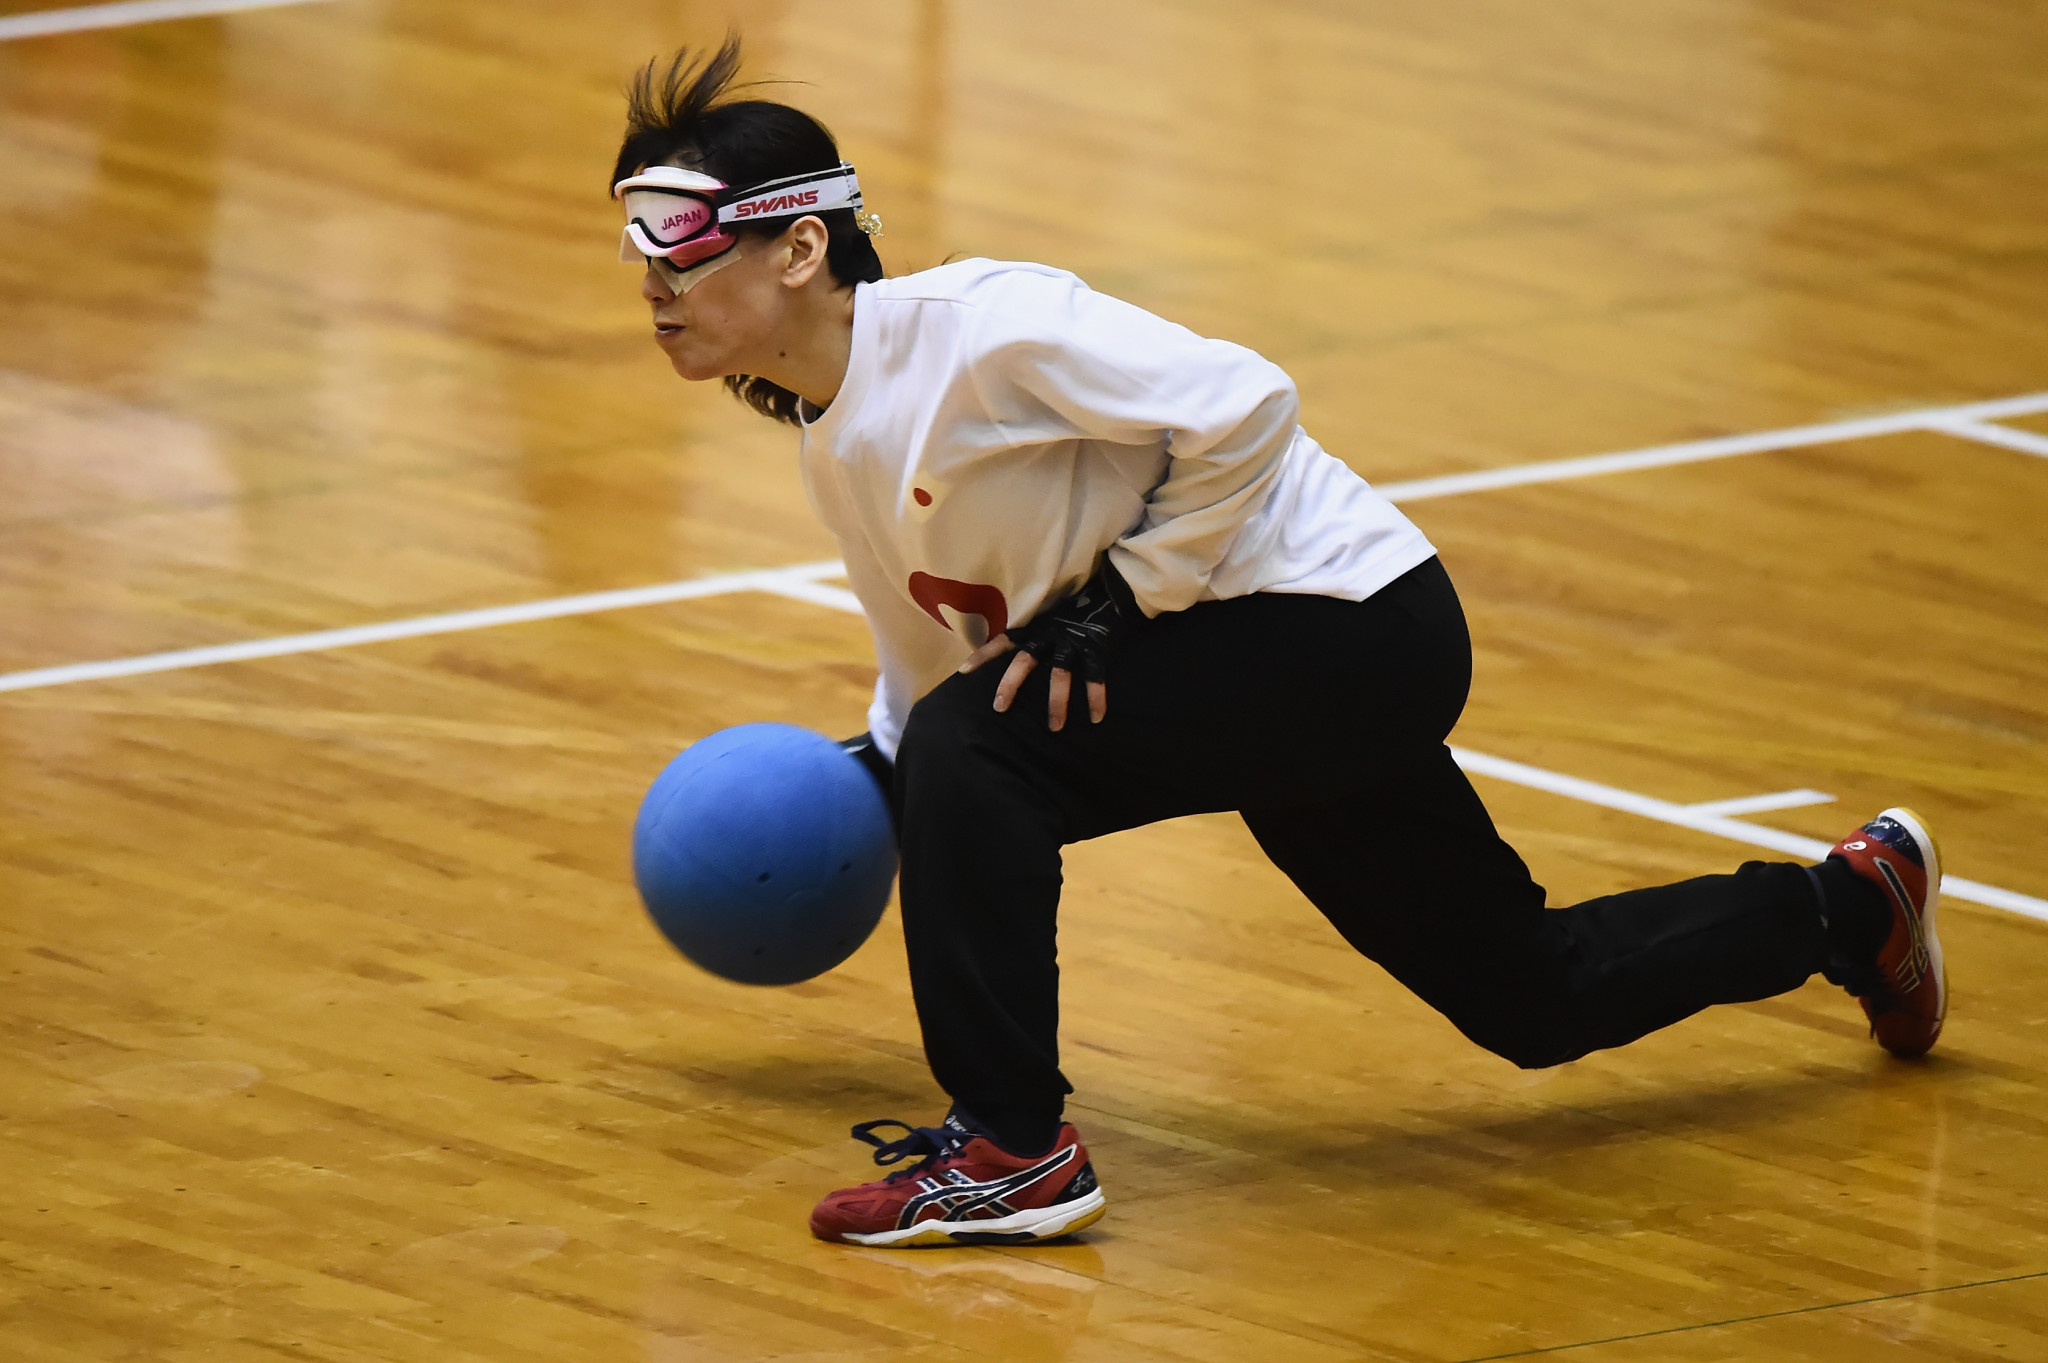 Four teams set to contest Tokyo 2020 goalball test event